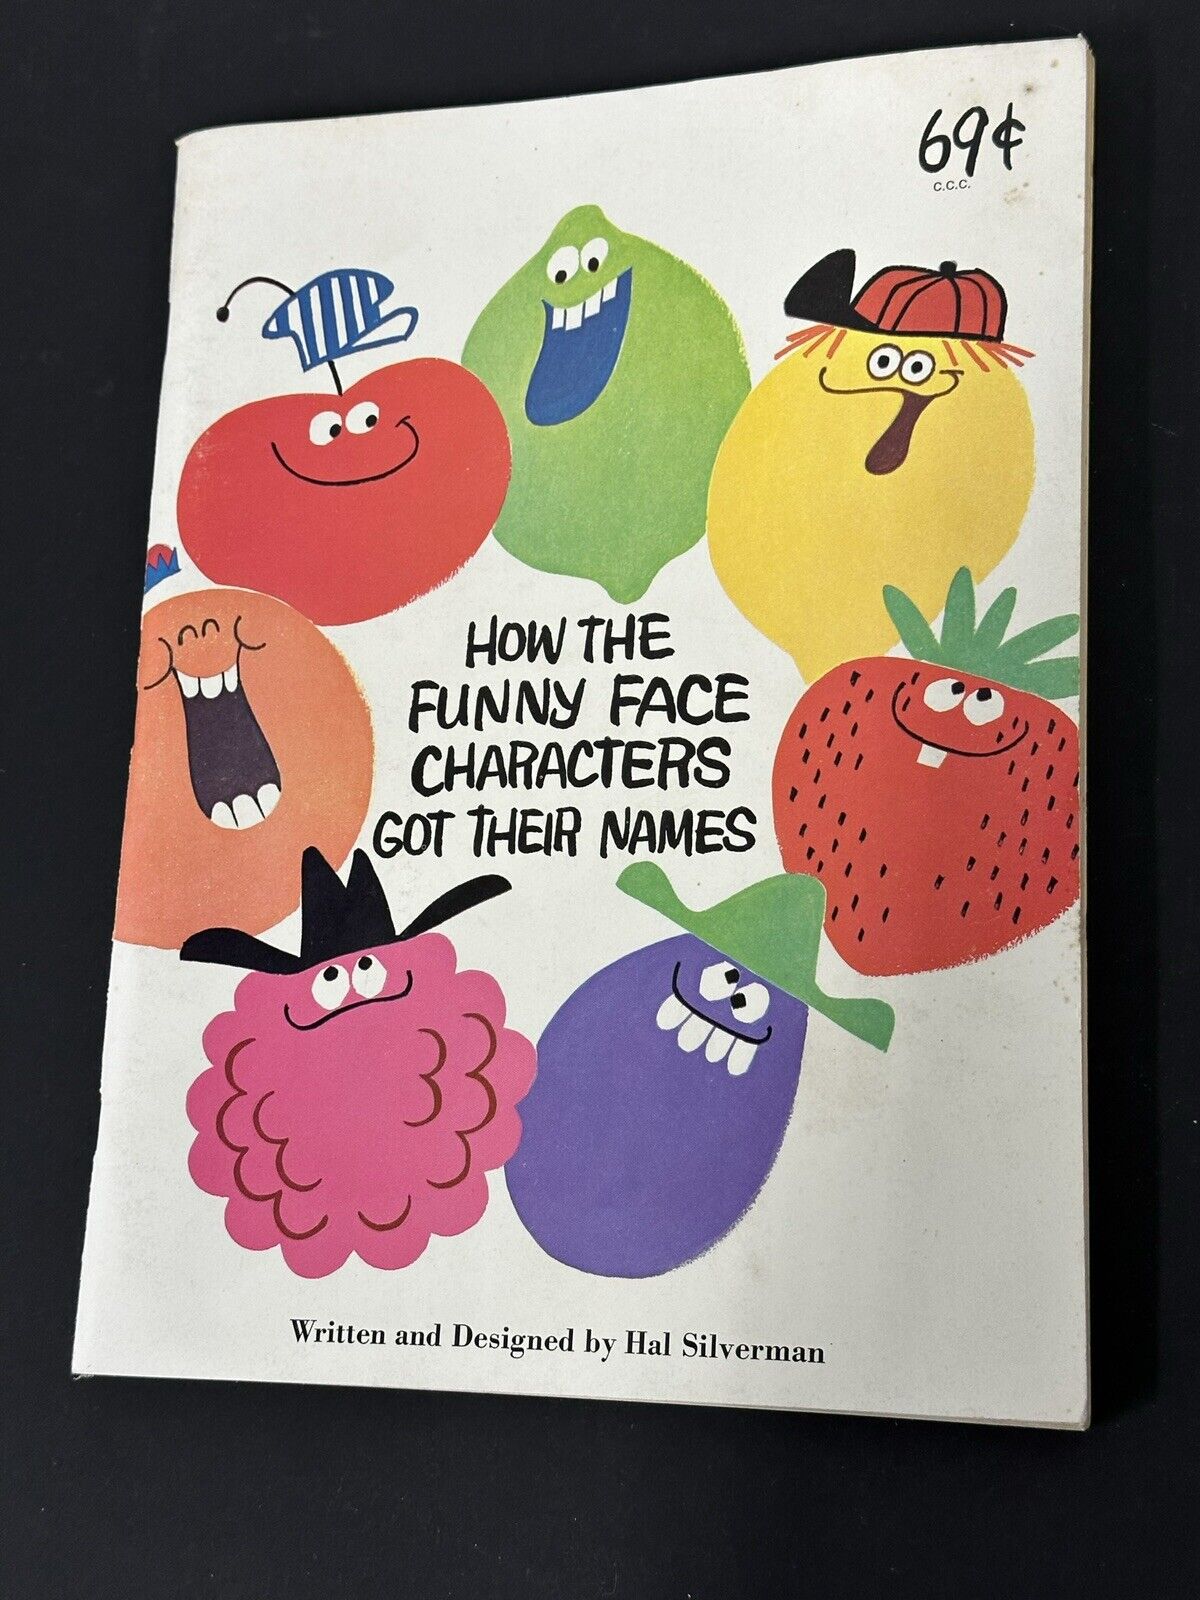 Vintage FUNNY FACE Storybook How Characters Got Names Pillsbury Fruit Bunch 1966